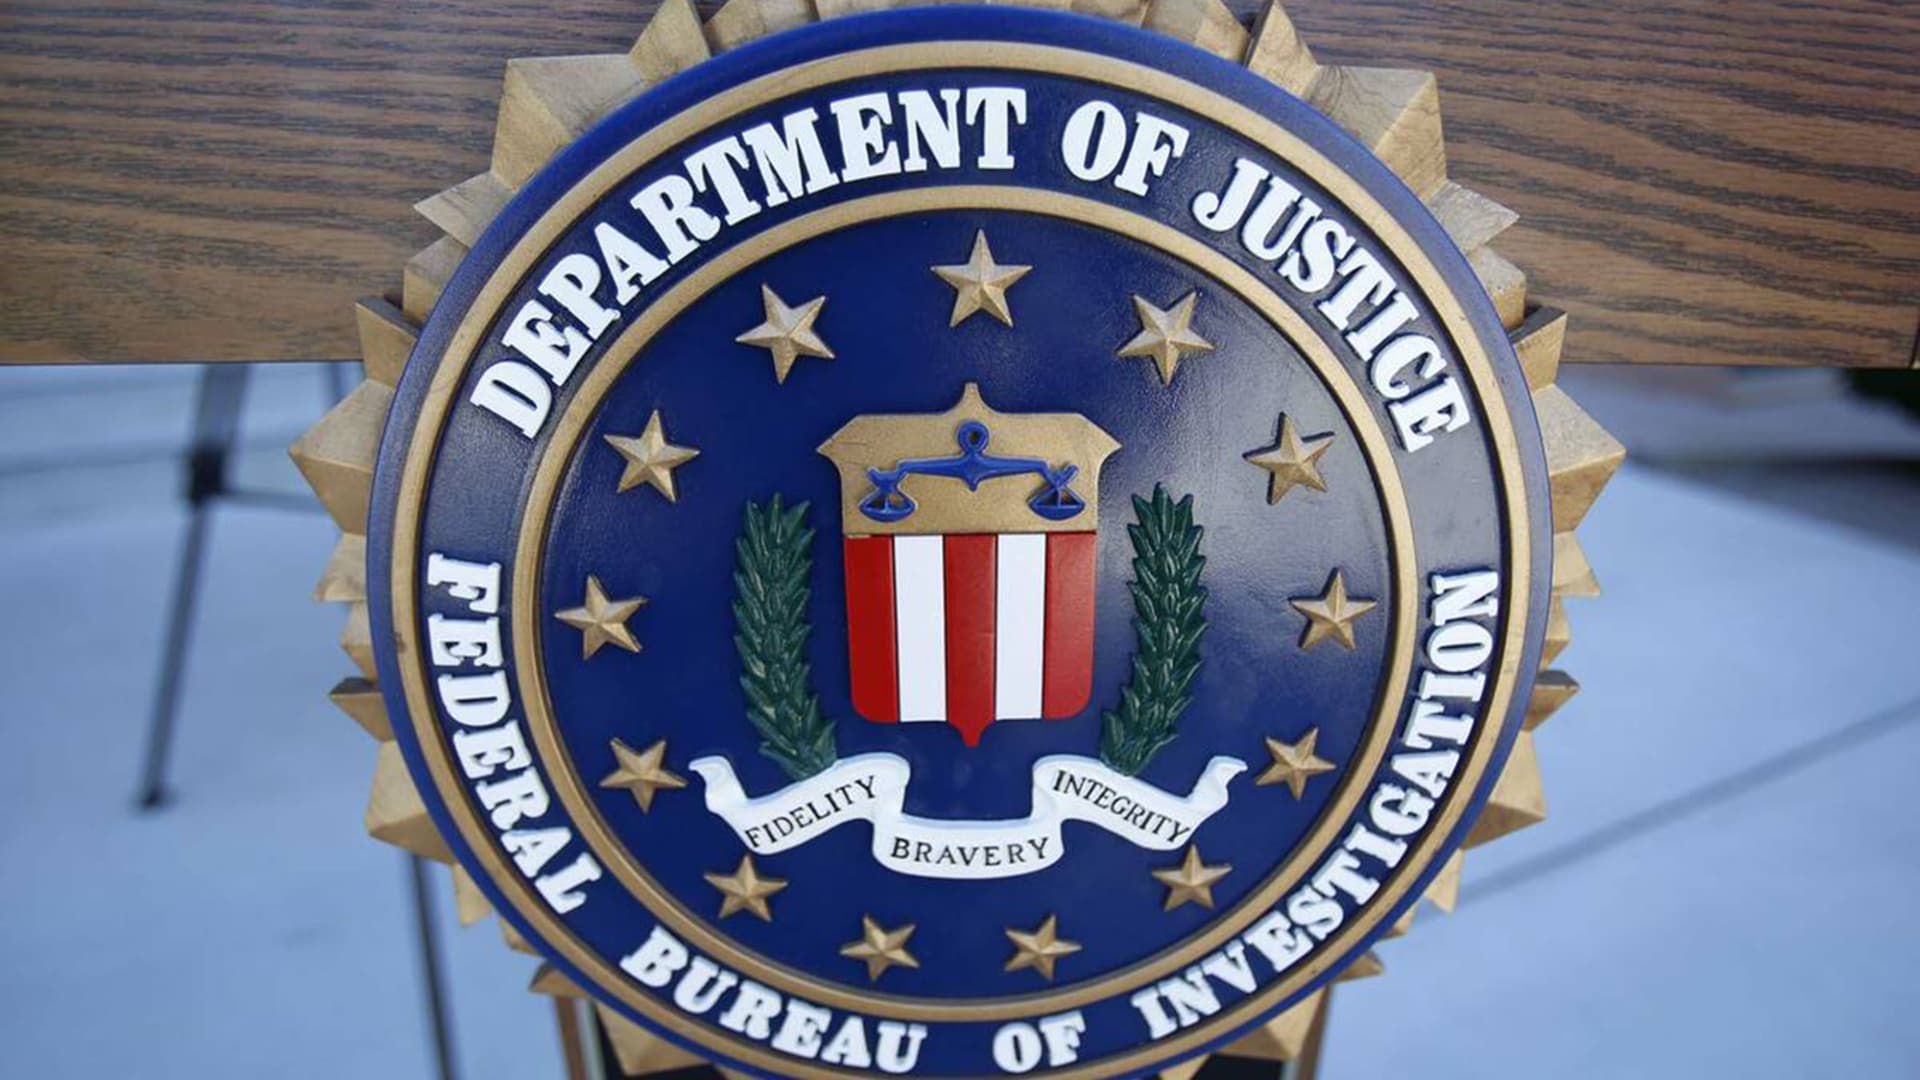 Pig butchering scam results in four indictments, two arrests: DOJ